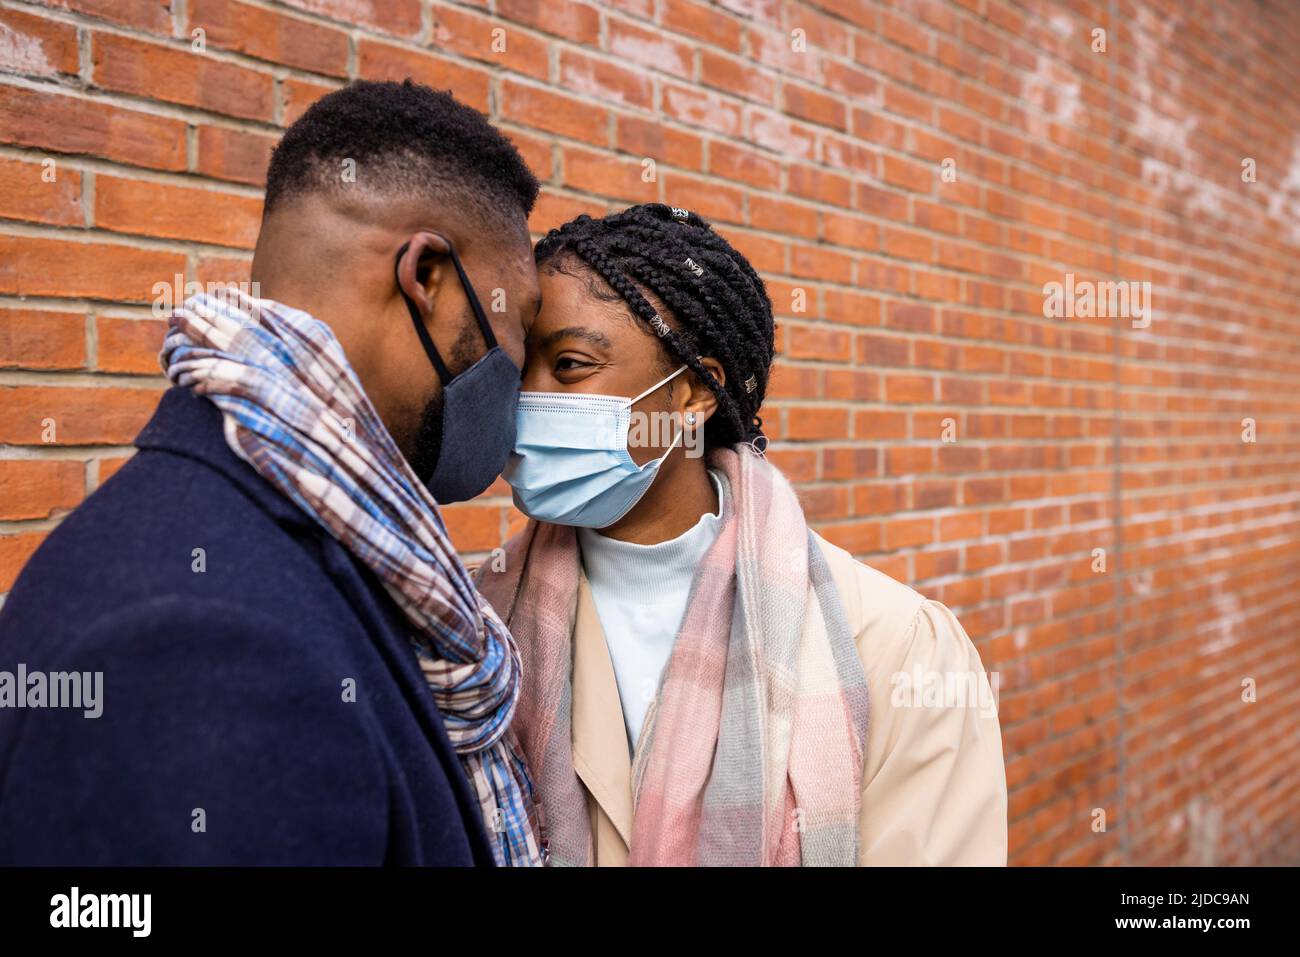 Couple wearing face masks facing each other by brick wall Stock Photo